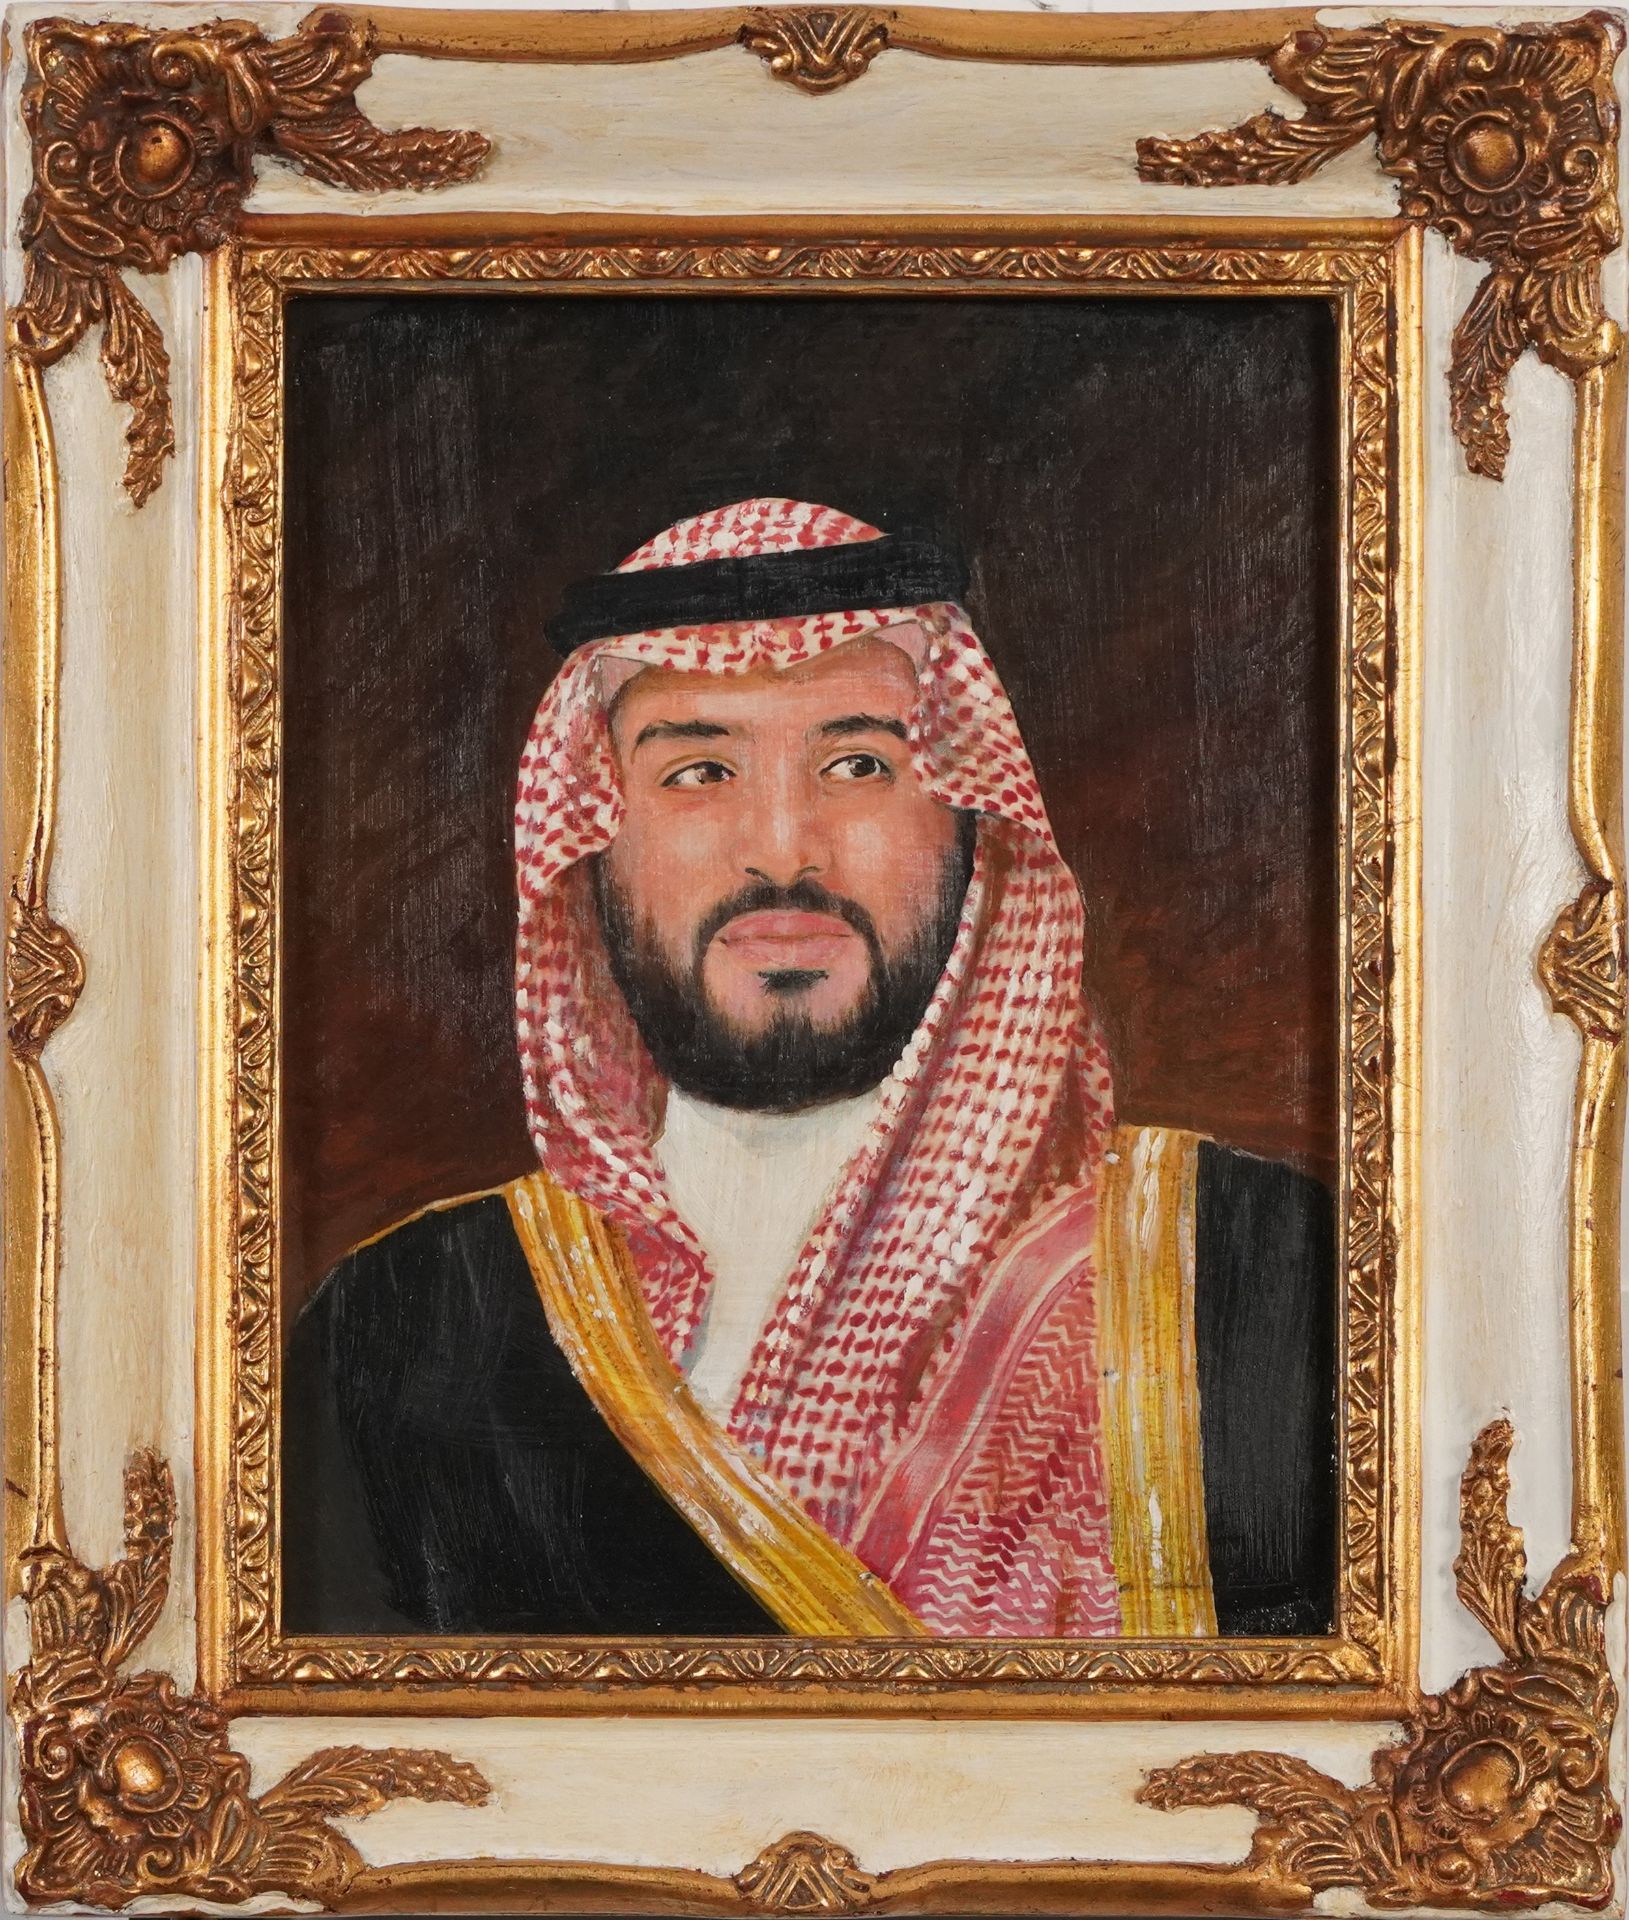 Portraits of Salman of Saudi Arabia, two pictures, framed, the largest 34cm x 26.5cm excluding the - Image 3 of 7